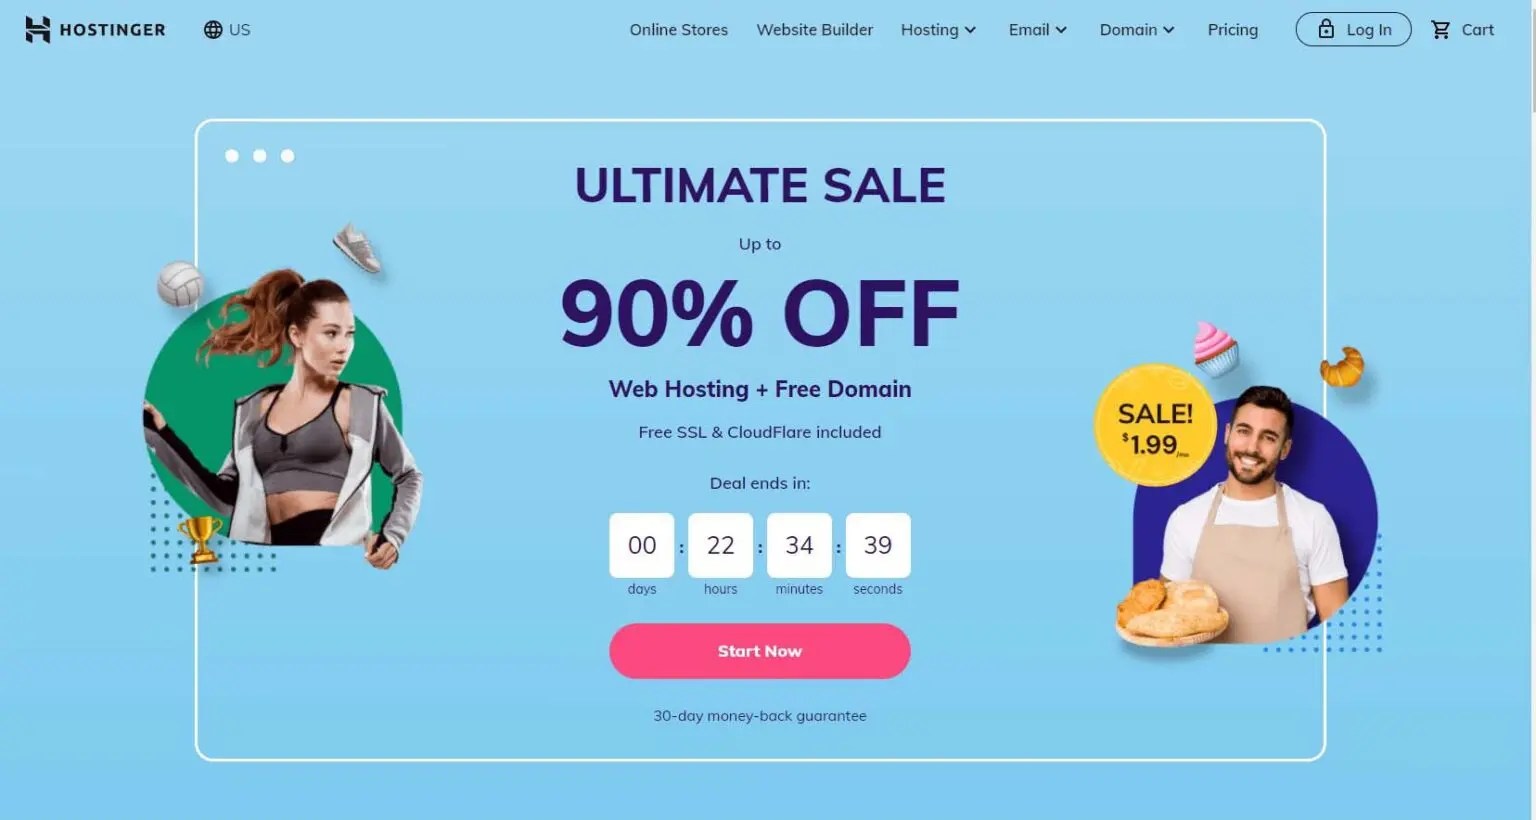 How to buy web hosting with a free domain